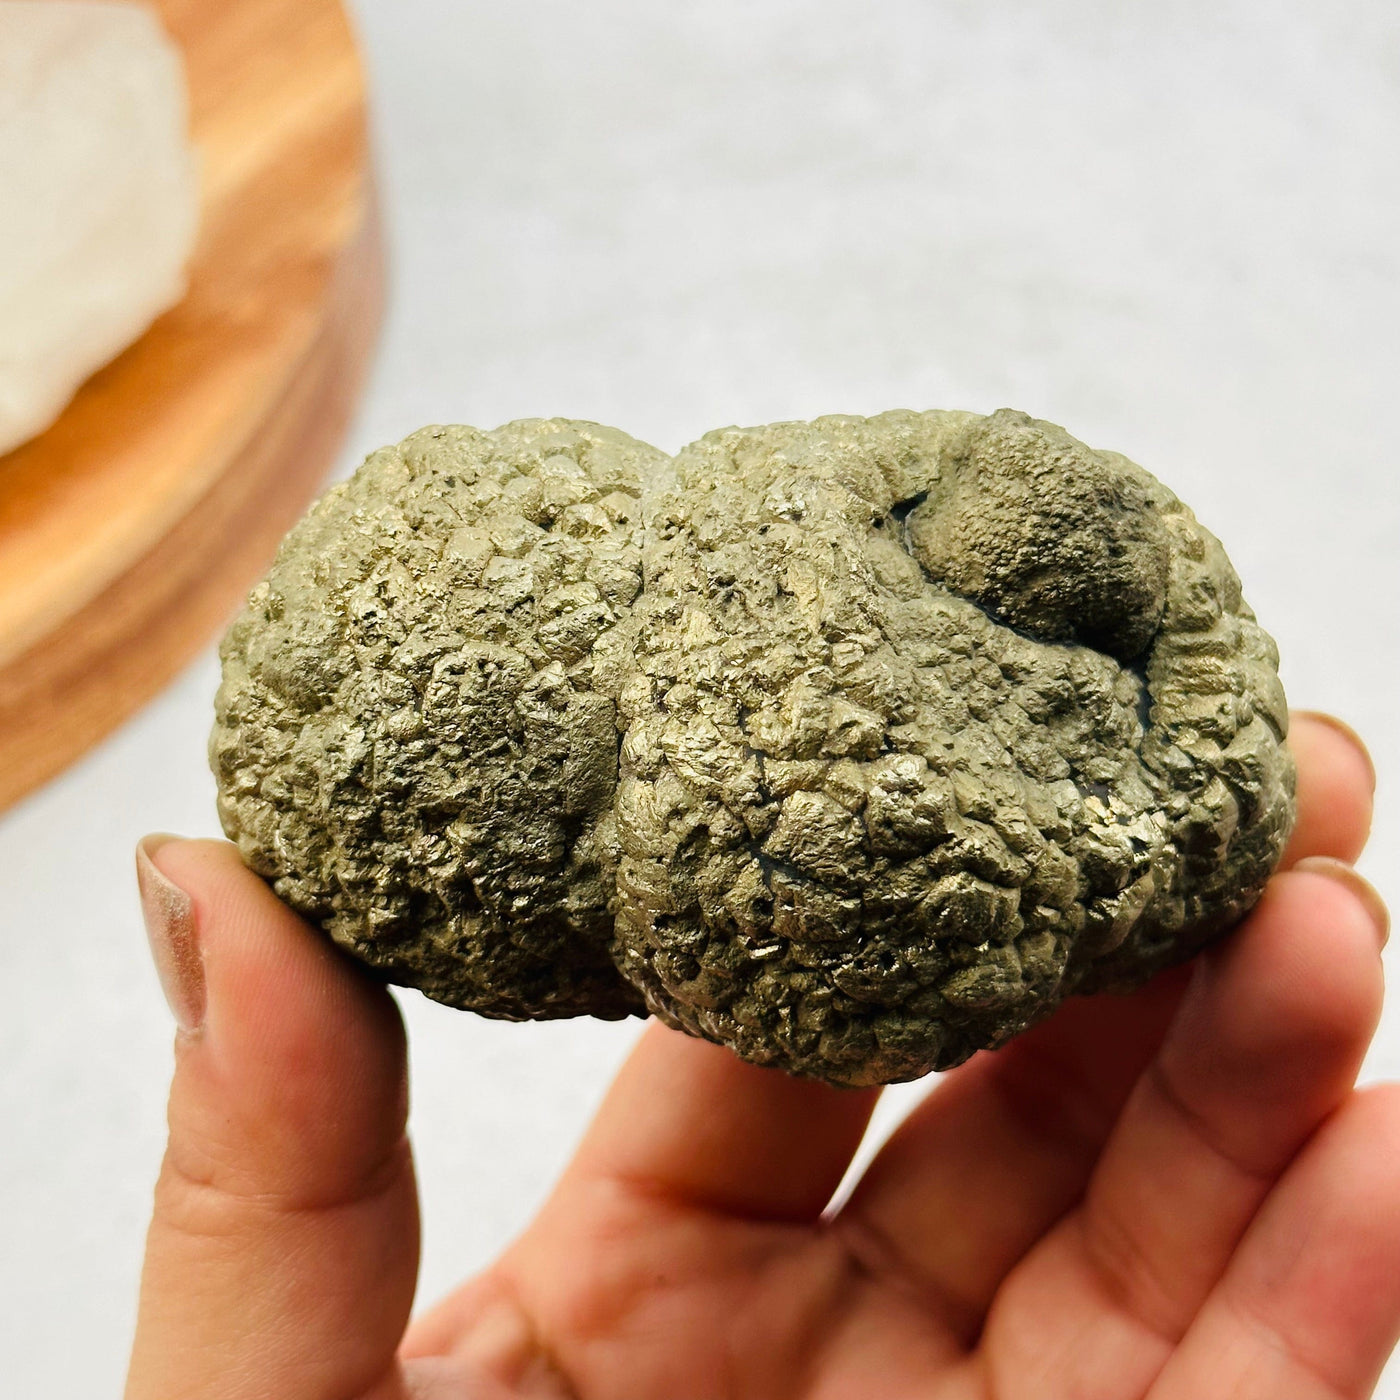 Pyrite Nodule - High Quality in hand for size reference